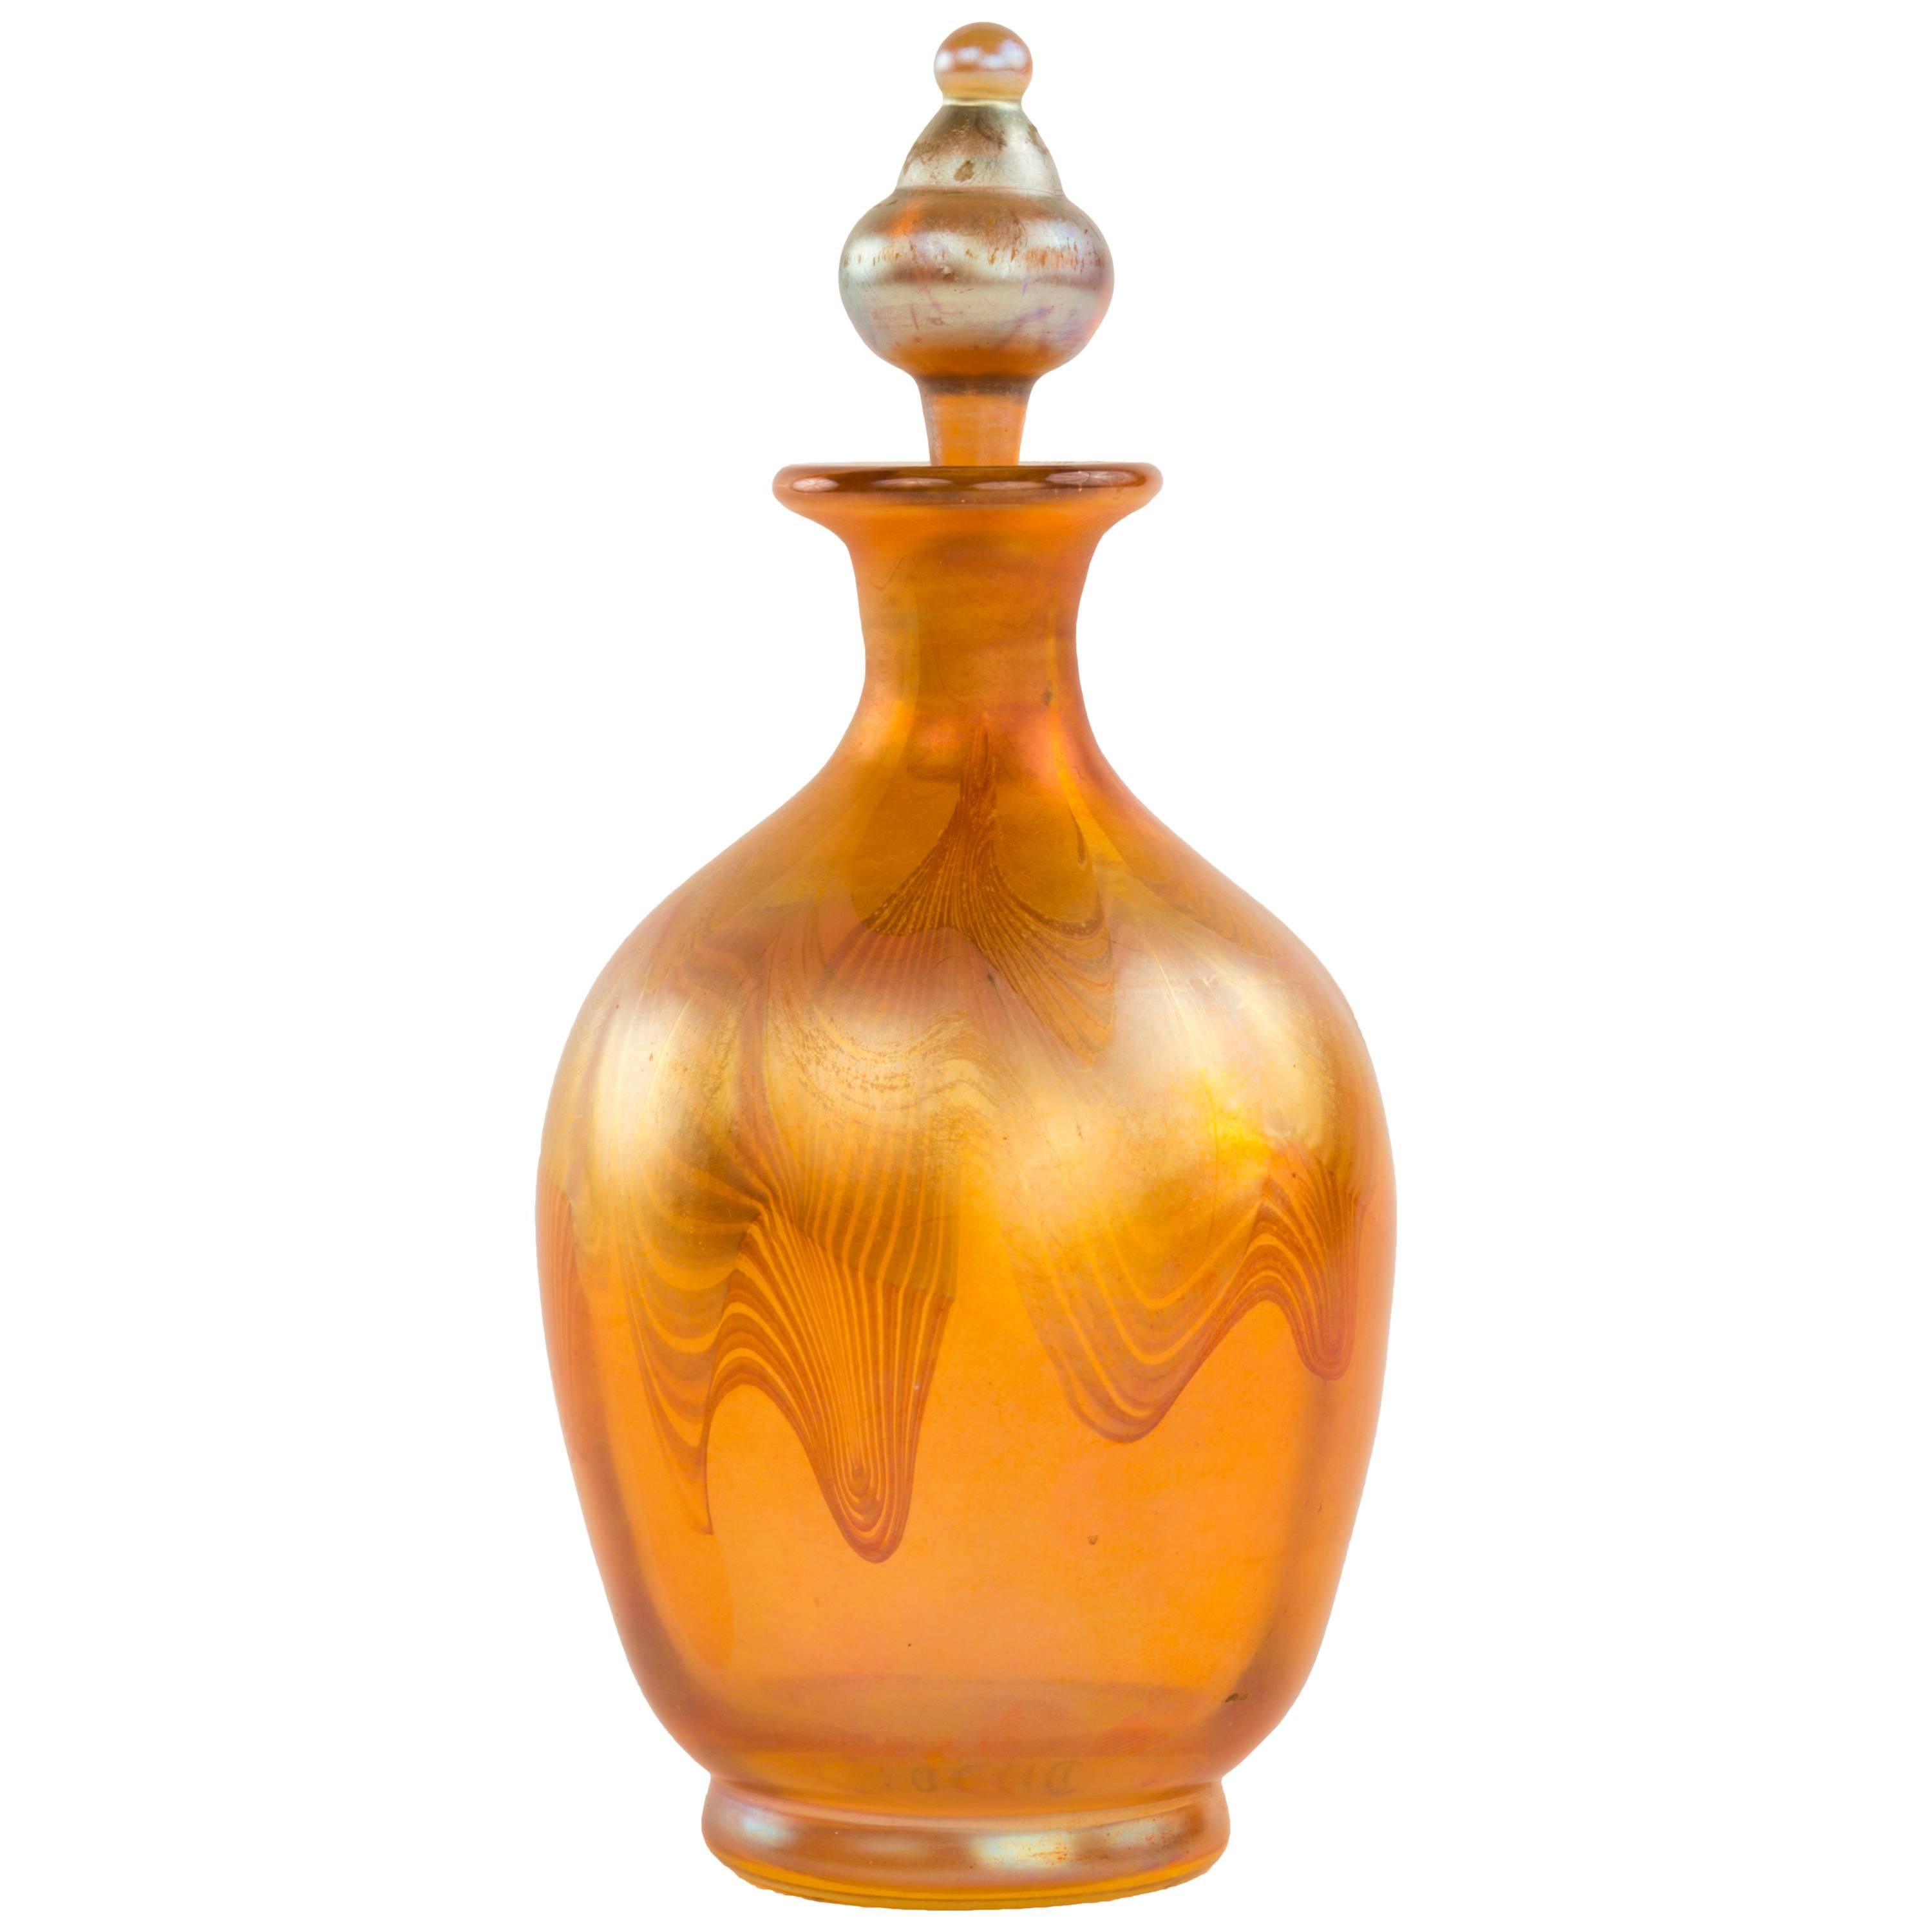 Tiffany Studios Blown Glass and Decorated Favrile Perfume Bottle